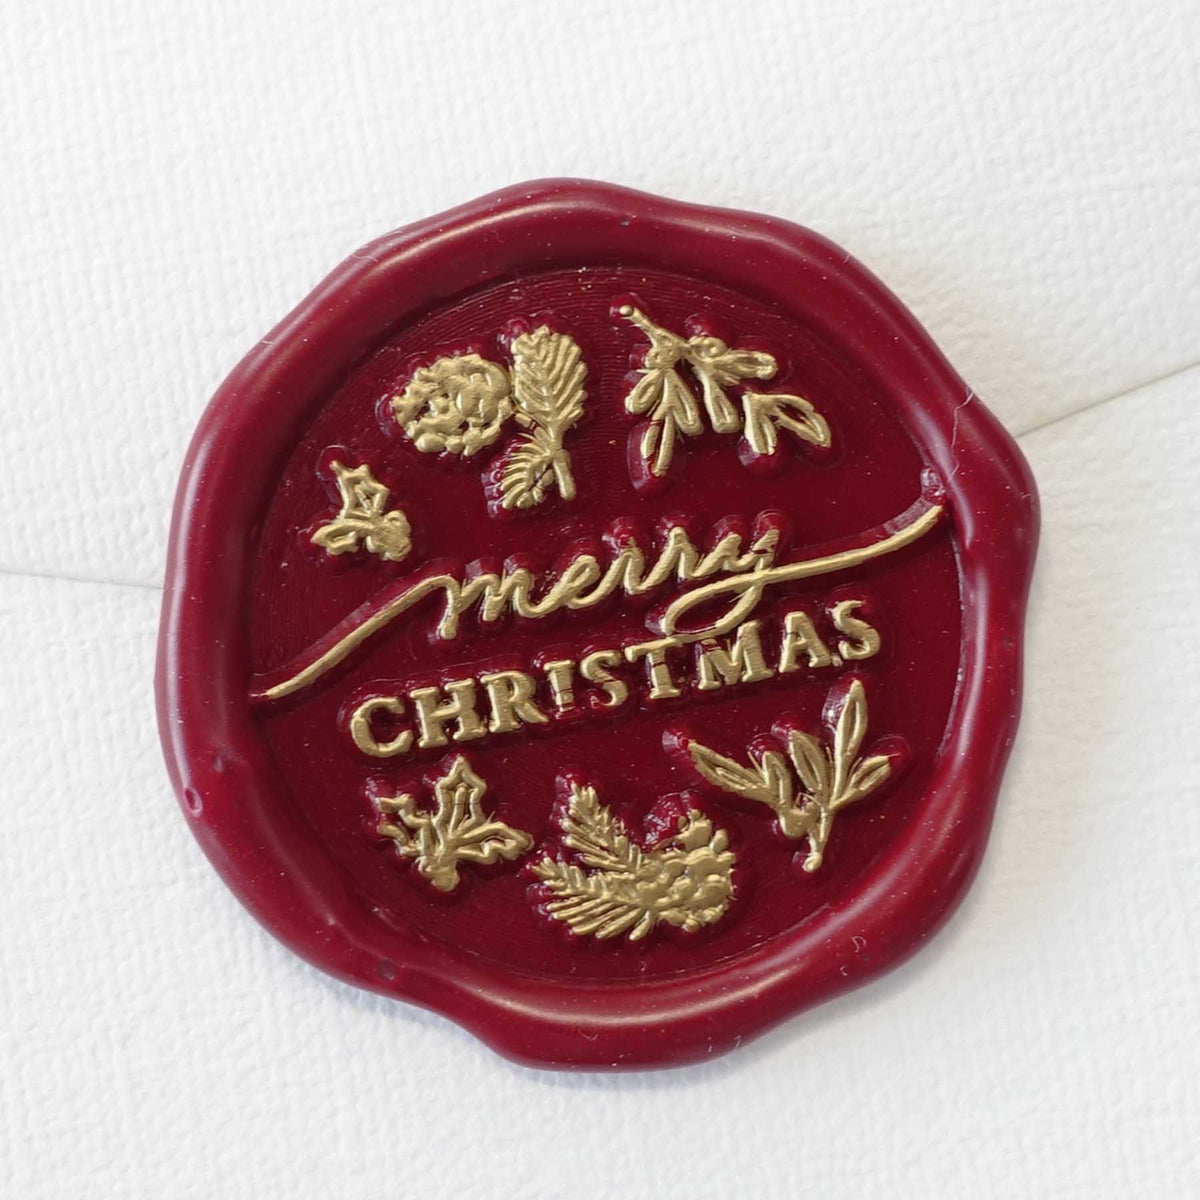 Merry Christmas wax seal stamp, wax seal kit or stamp head